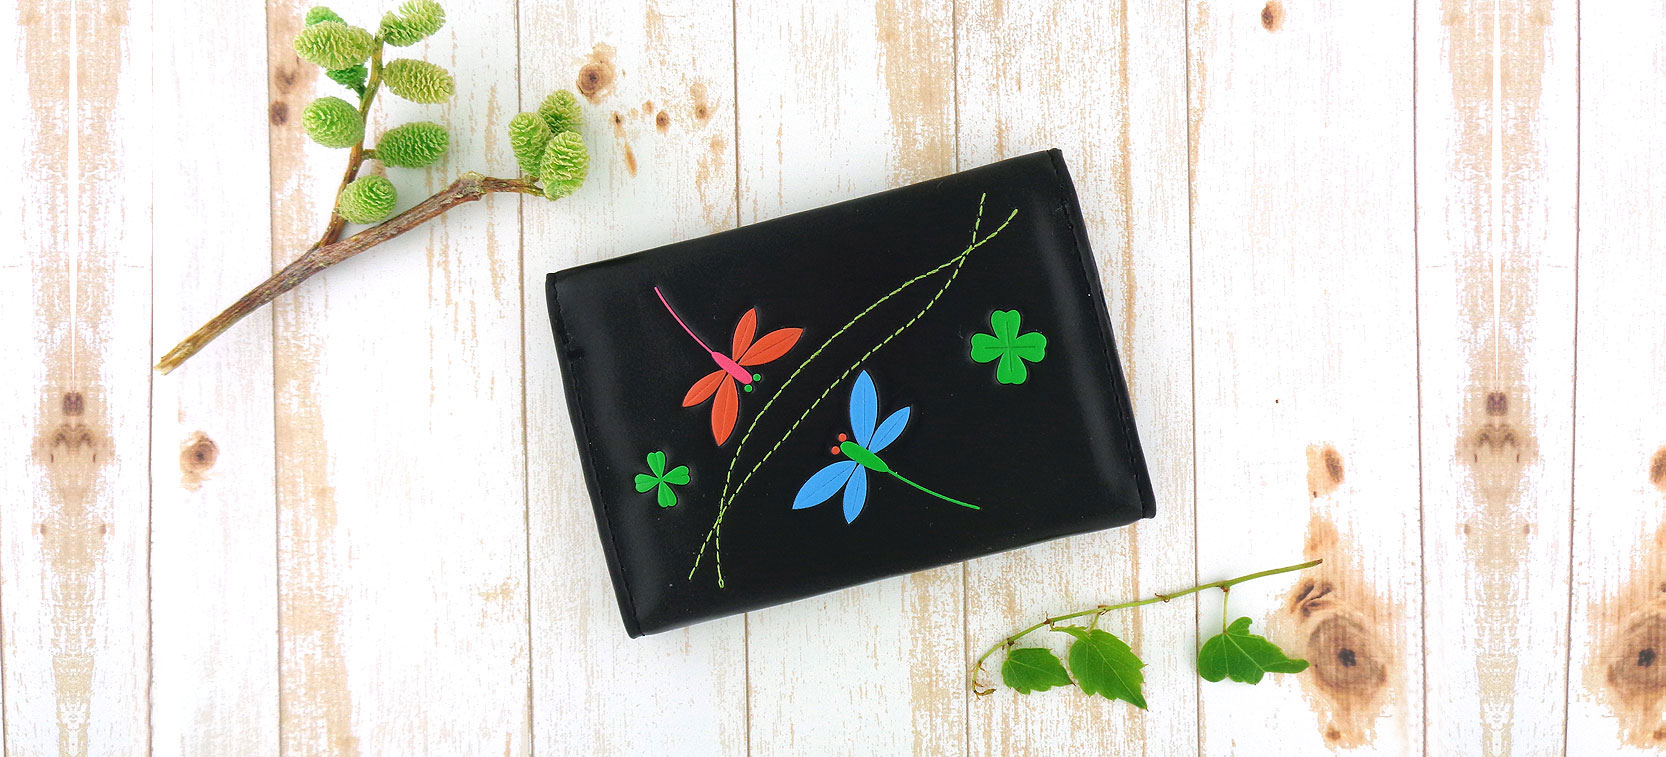 LAVISHY design and wholesale good luck/lucky clover themed vegan accessories and gfits to gift shops, boutiques and book stores in Canada, USA and worldwide.